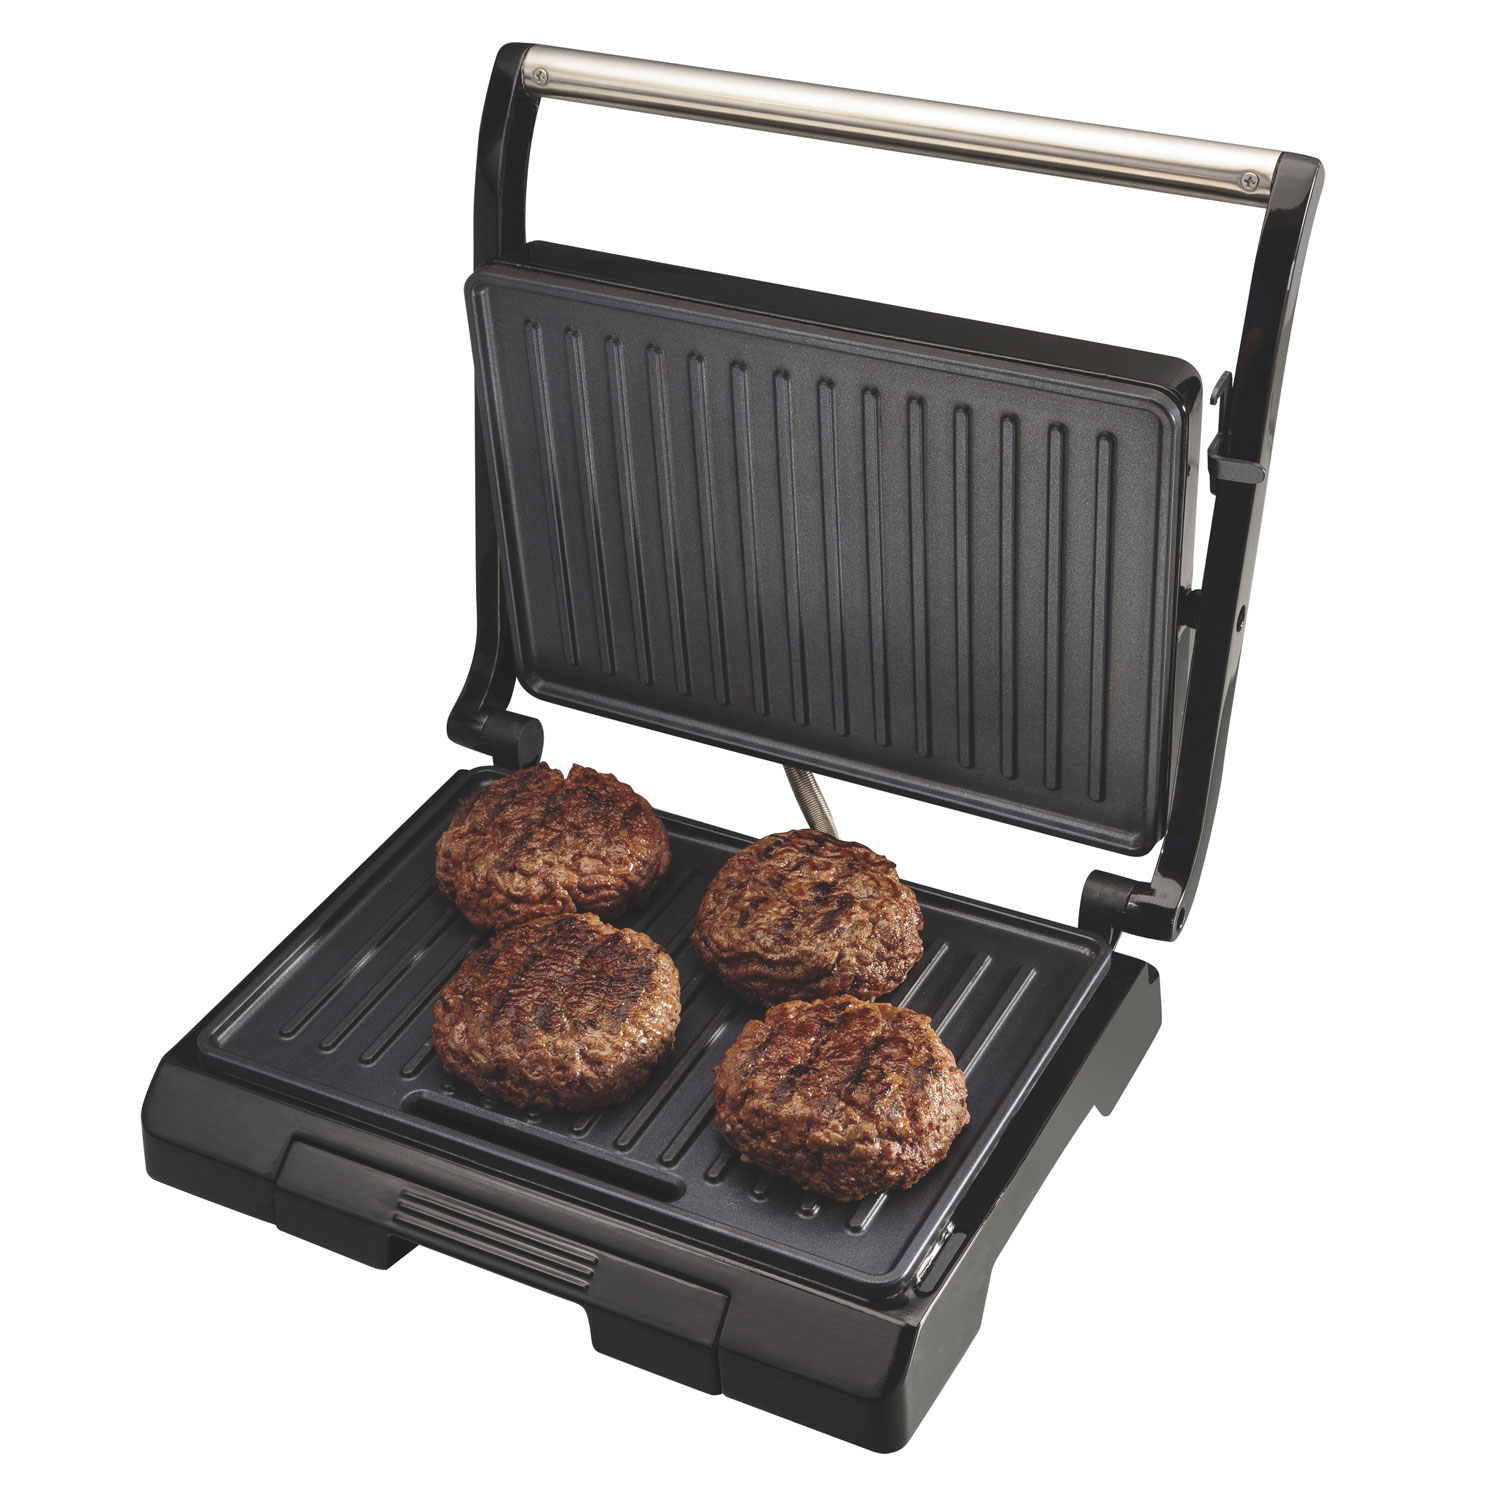 Compact Grill - Model 25218PS